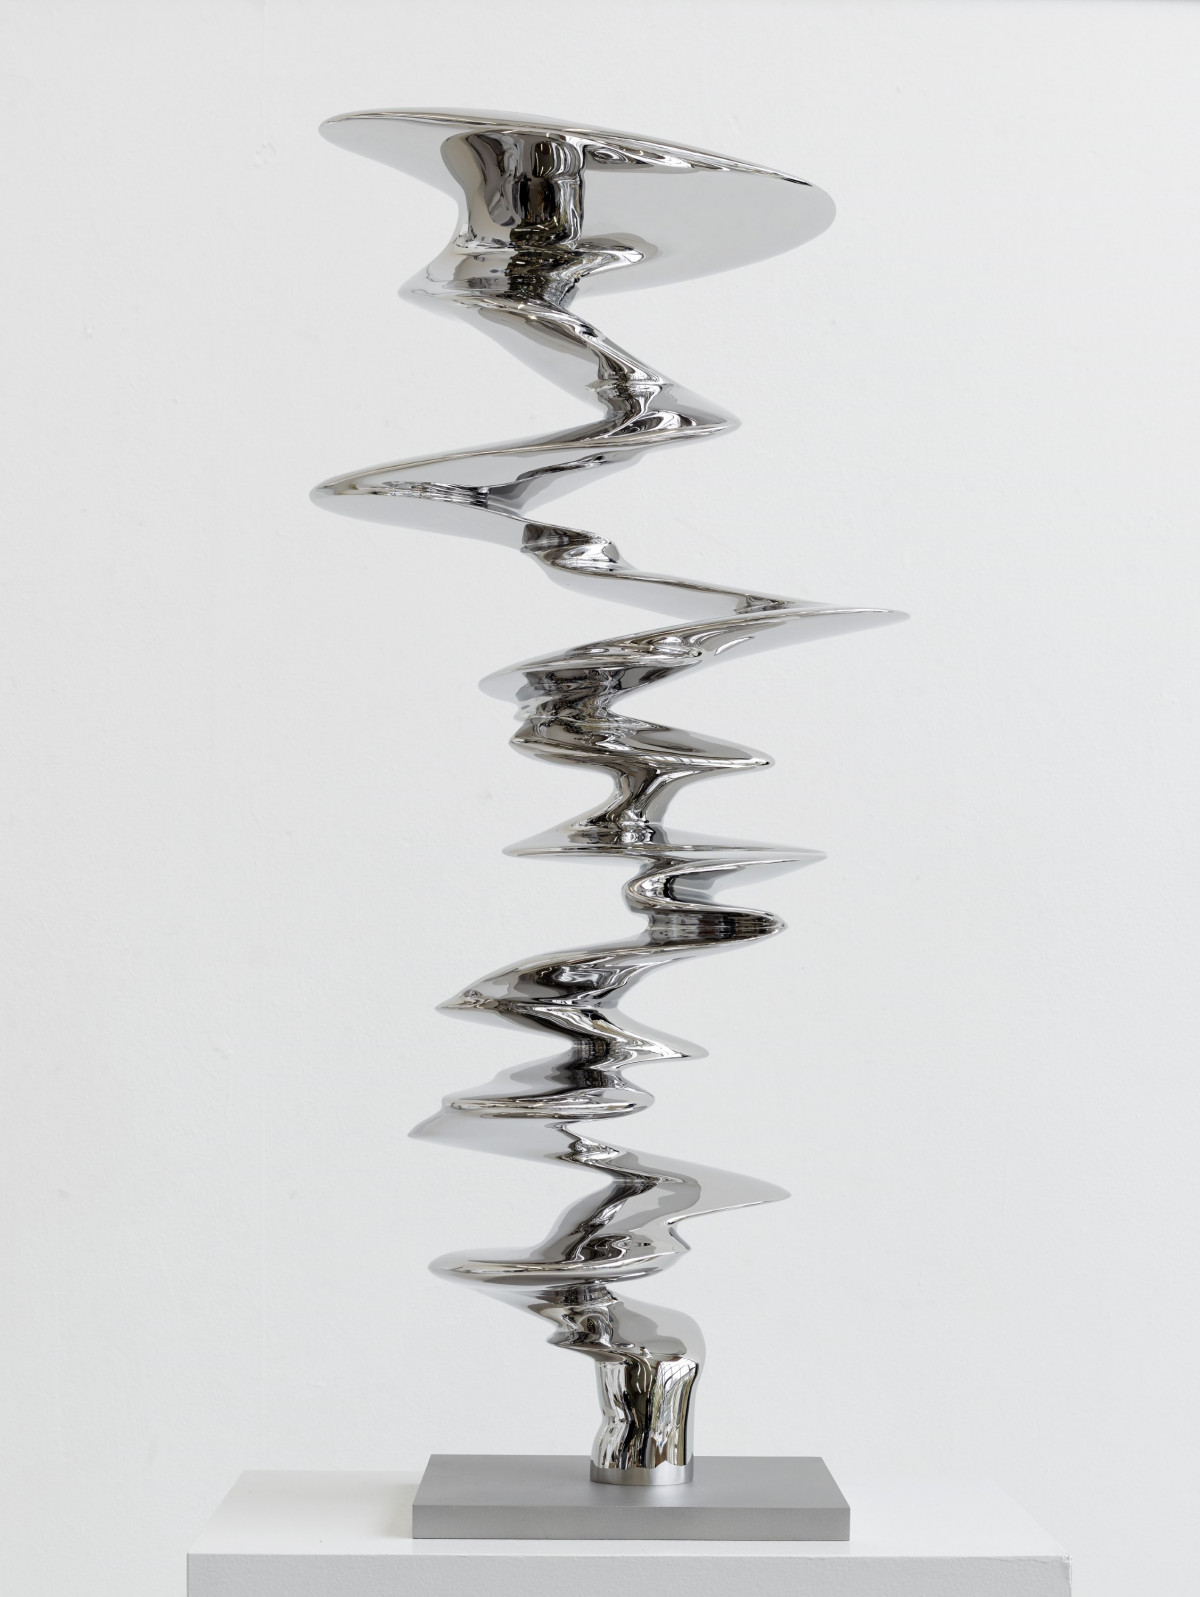 Tony Cragg, ‘Stages’, 2022, Stainless steel